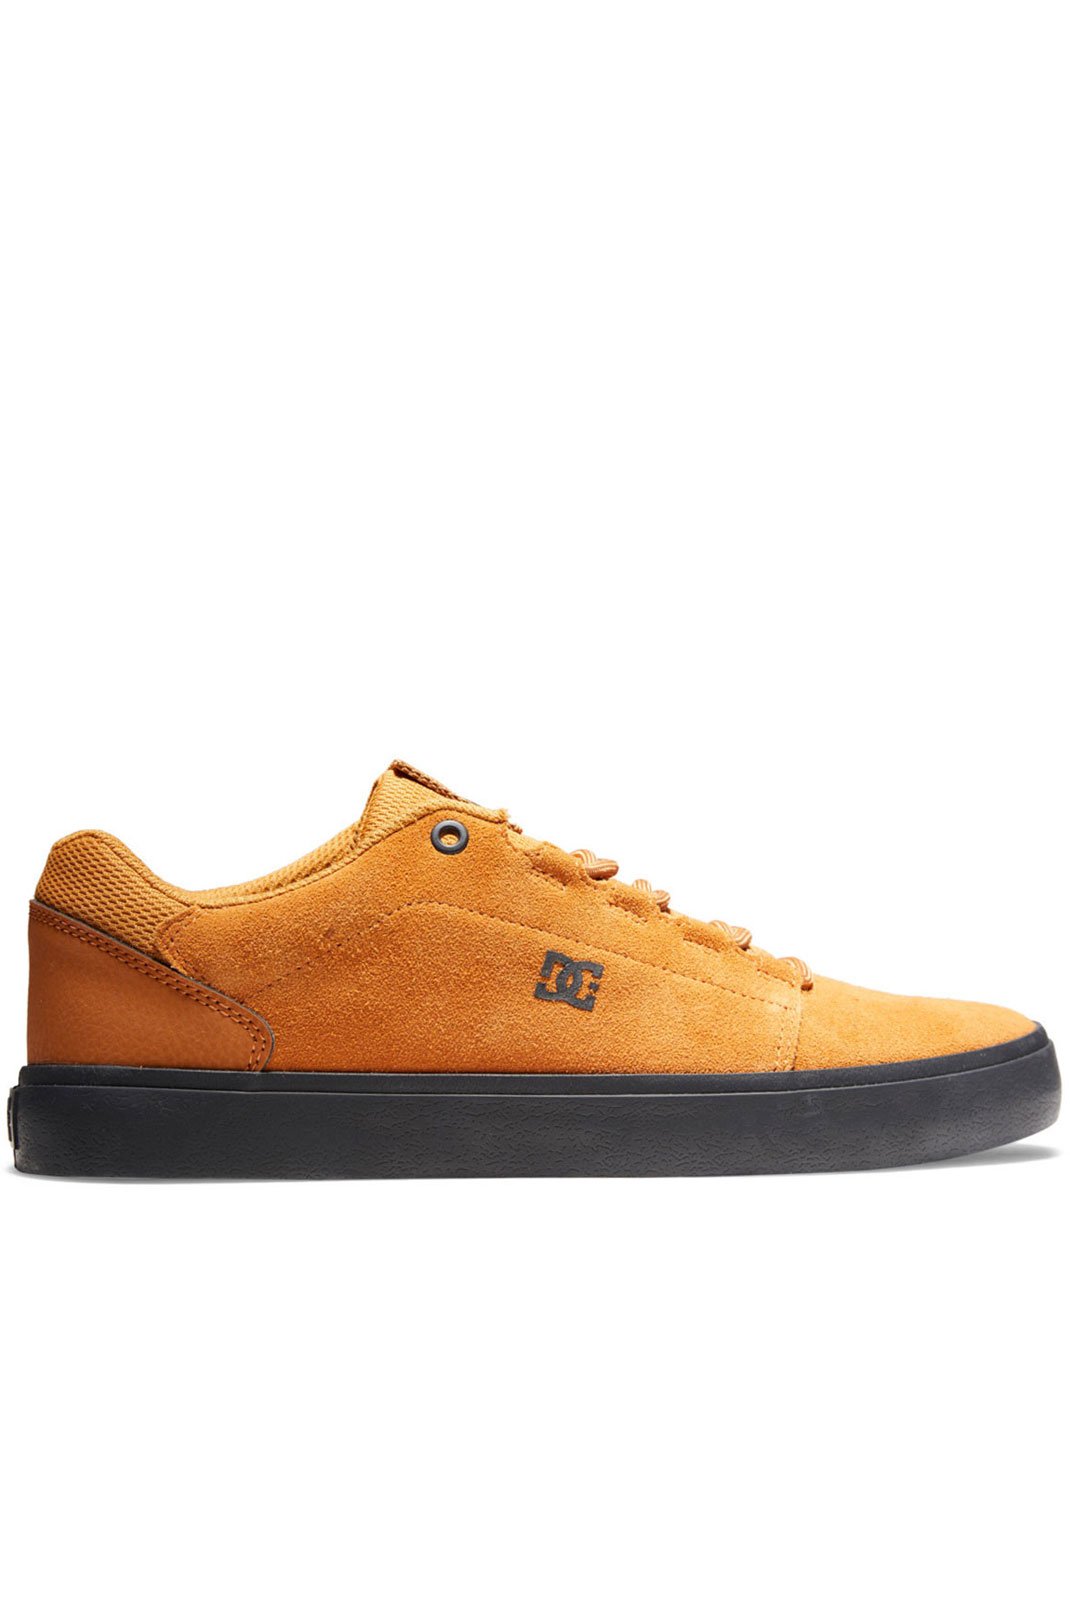 Sneakers / Sport  Dc shoes ADYS300580 KWH